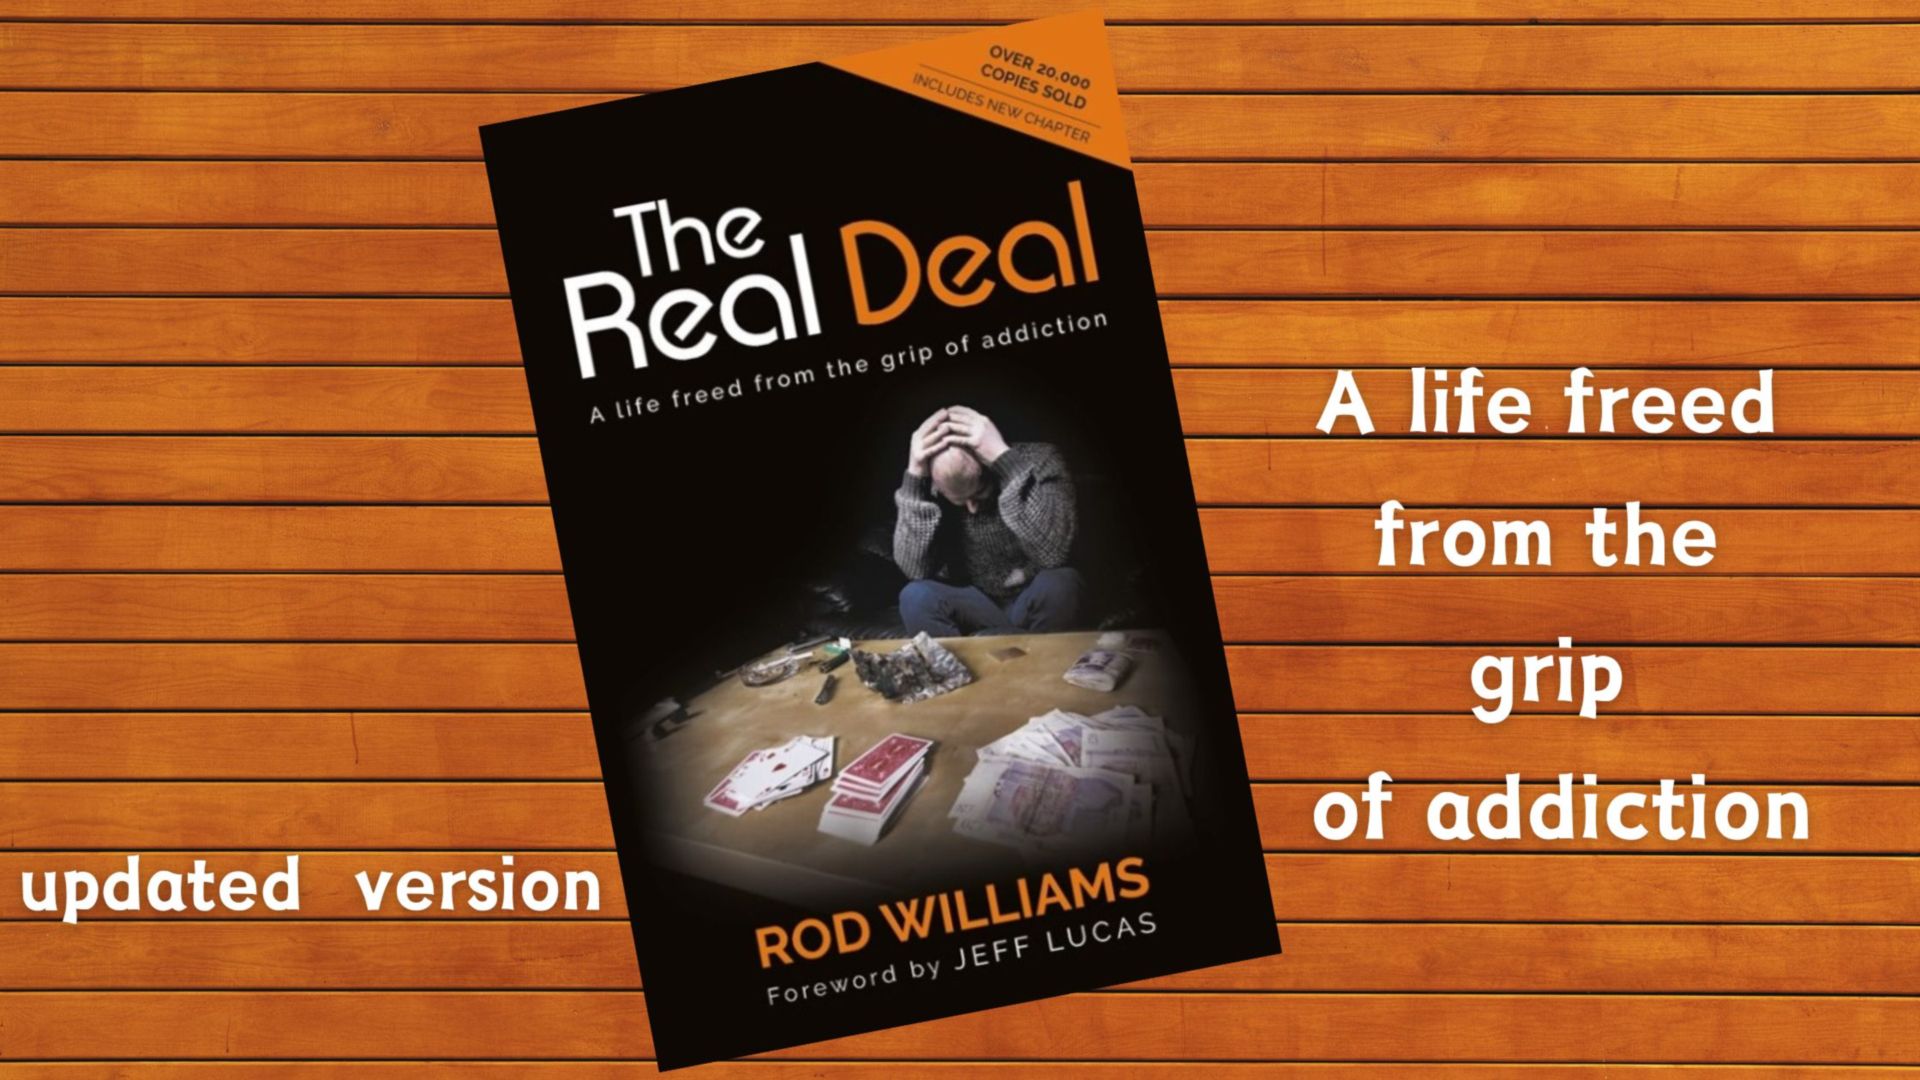 An interview with Rod Williams, author of 'The Real Deal' 